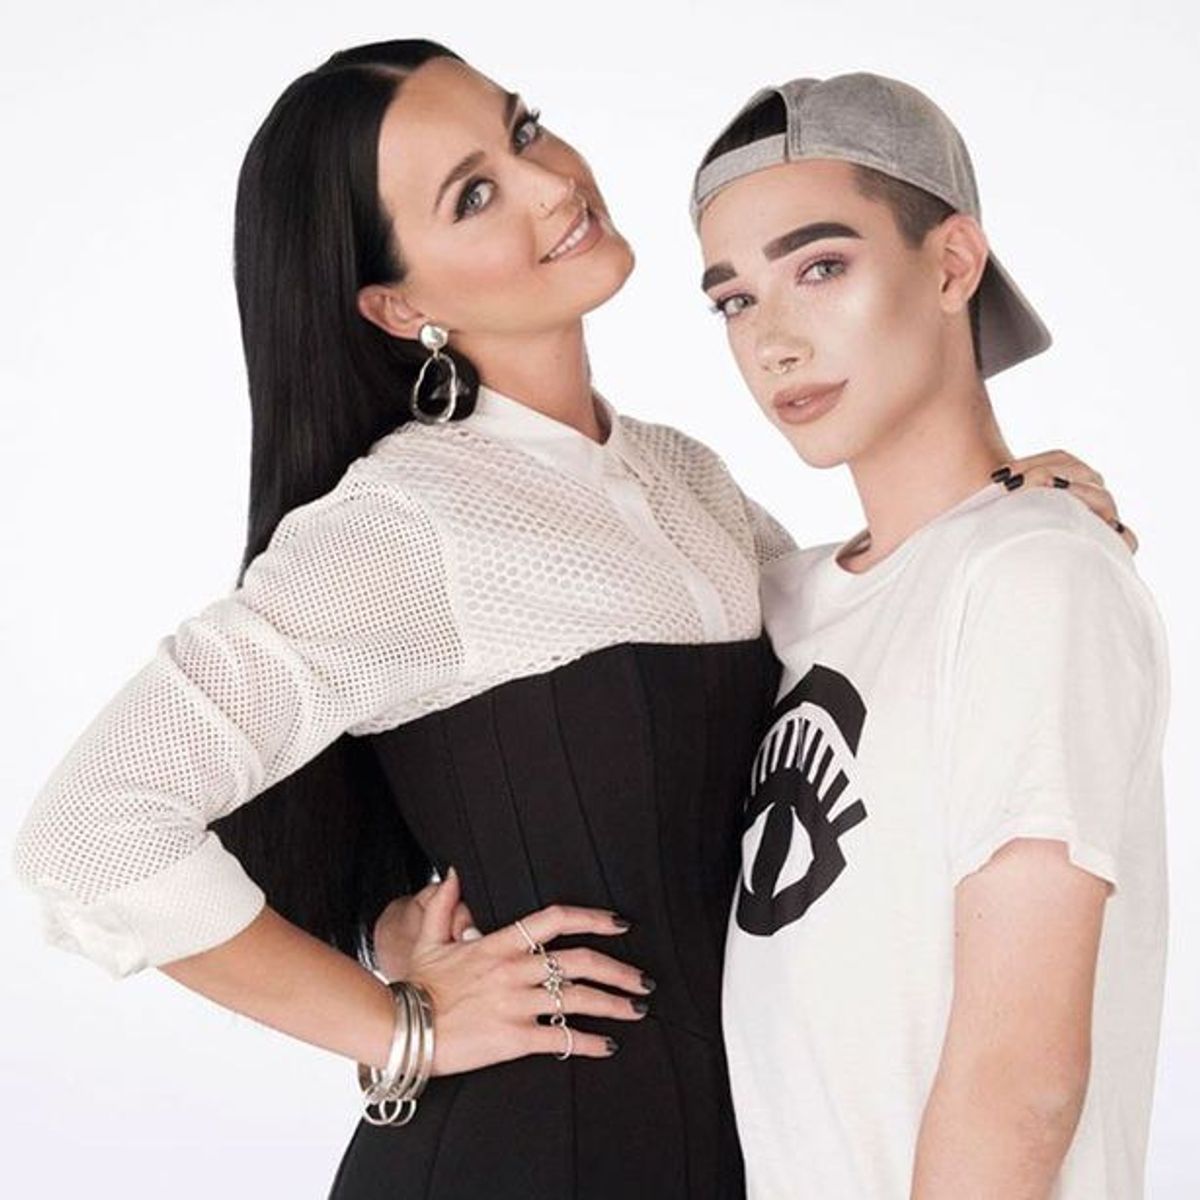 Covergirl Cosmetics Defies The Norm With Boy Spokesperson